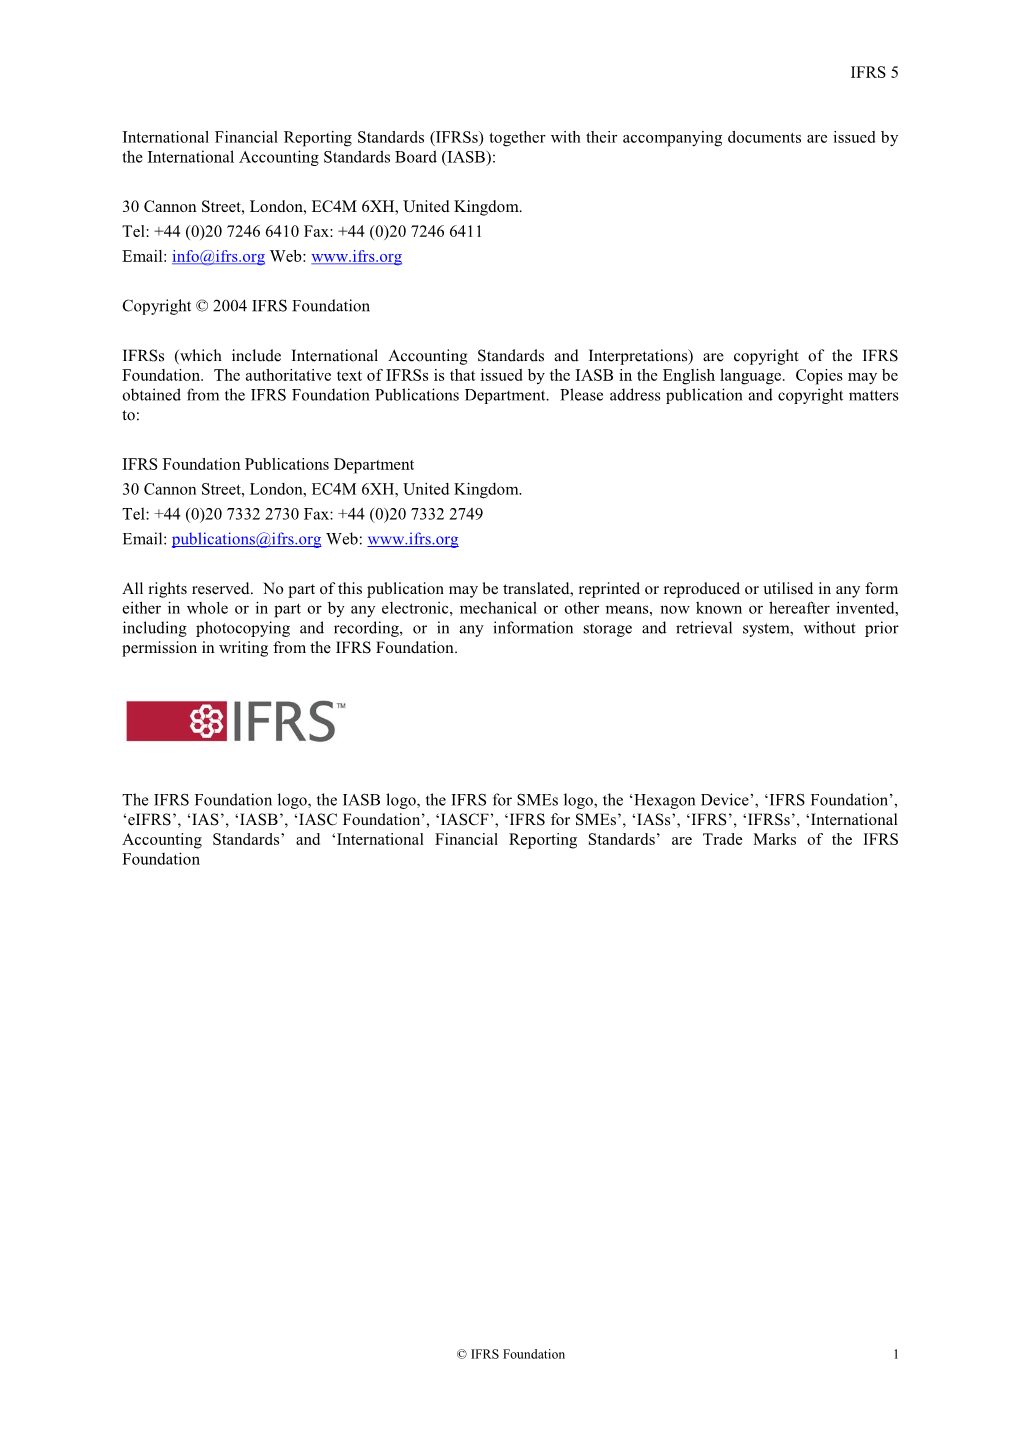 IFRS 5 International Financial Reporting Standards (Ifrss